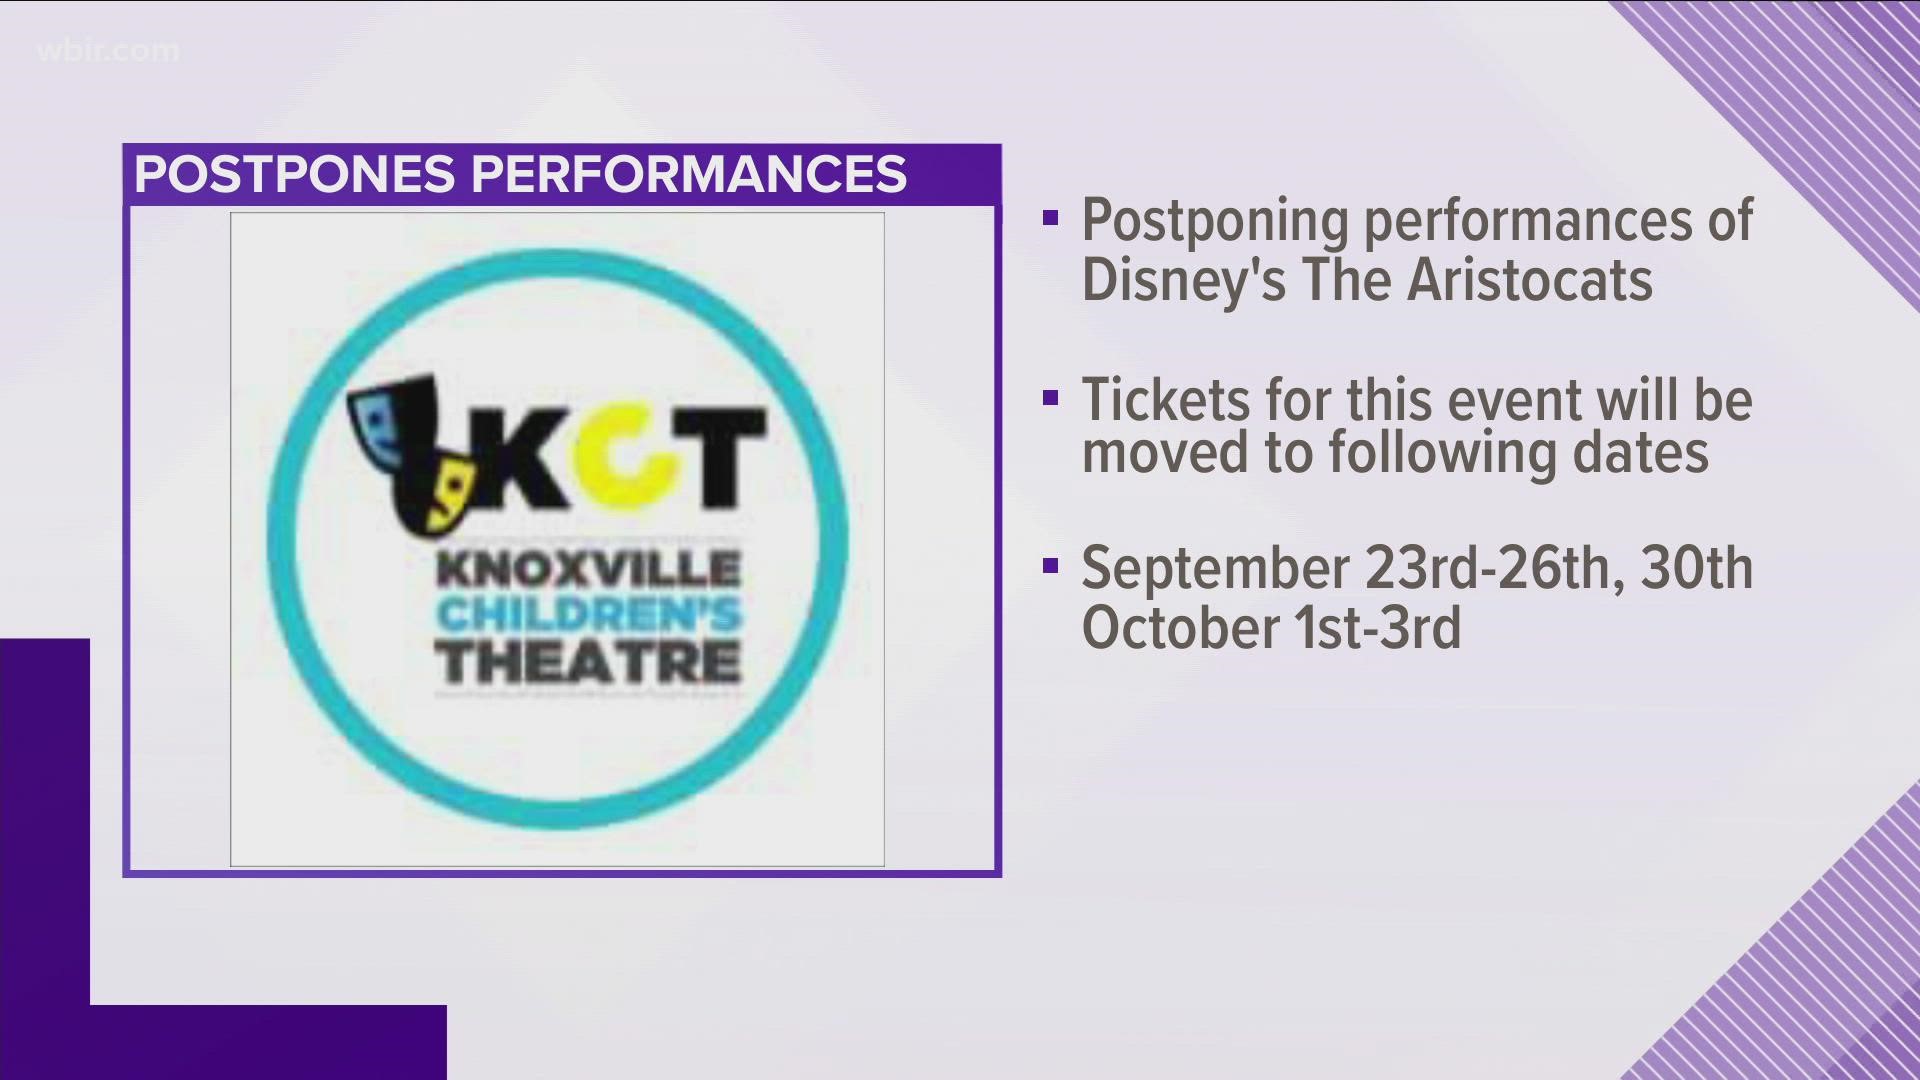 The Knoxville Children's Theatre said that they were postponing the performances out of an abundance of caution.